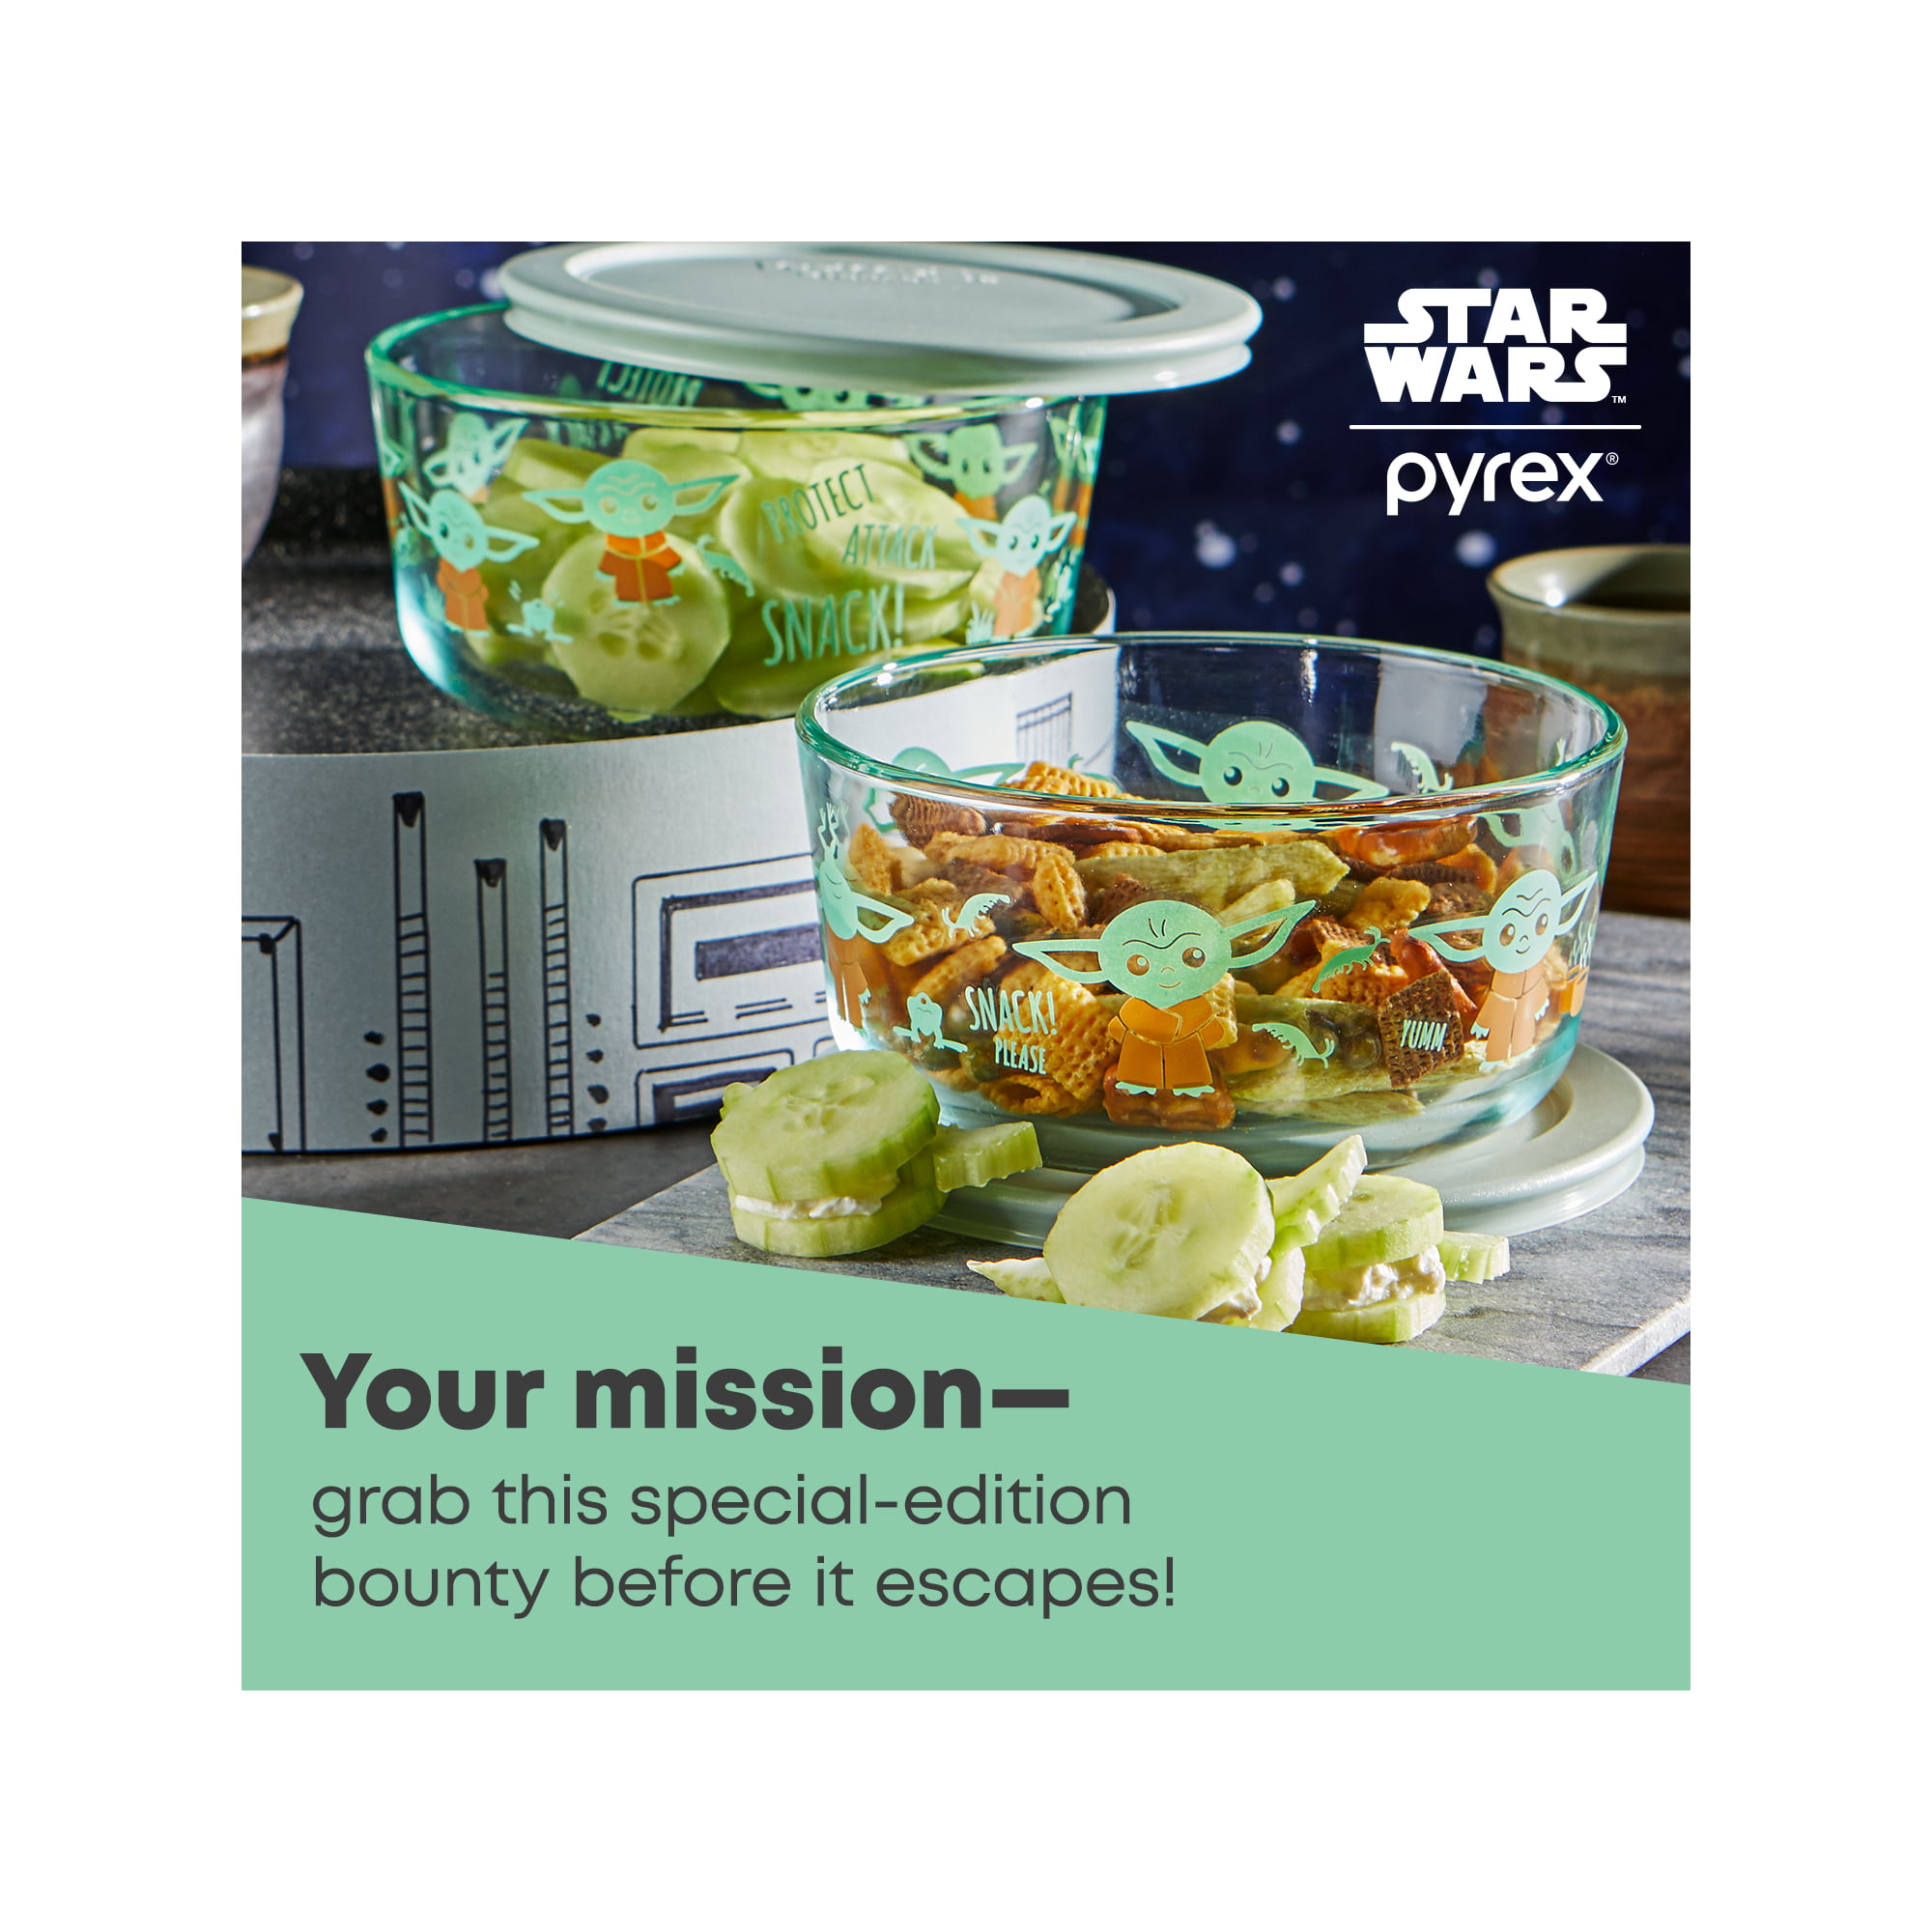 Incredible Star Wars Pyrex Storage Collection Is Strong With The